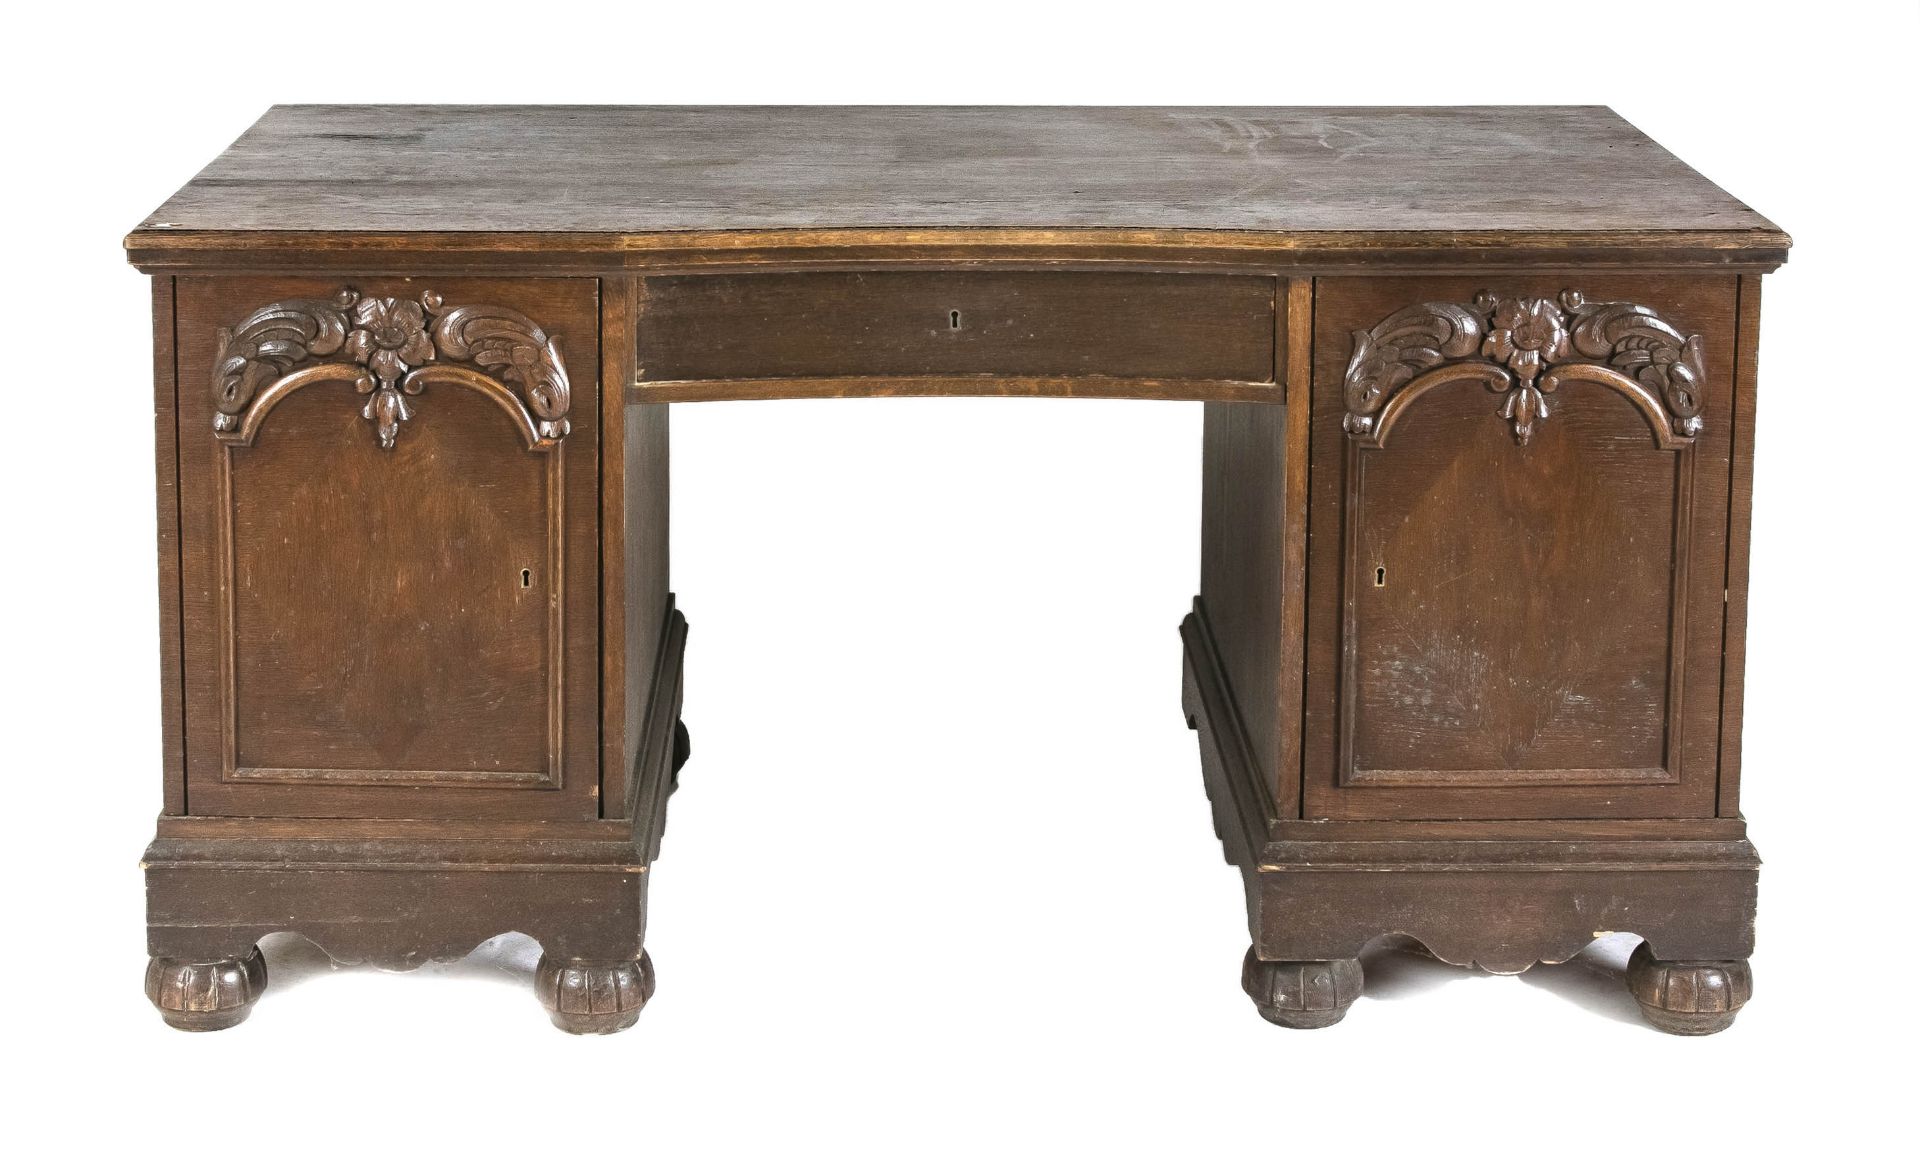 Desk circa 1910, oak, restored-dressed, 78 x 150 x 79 cm.- The furniture can not be viewed in our